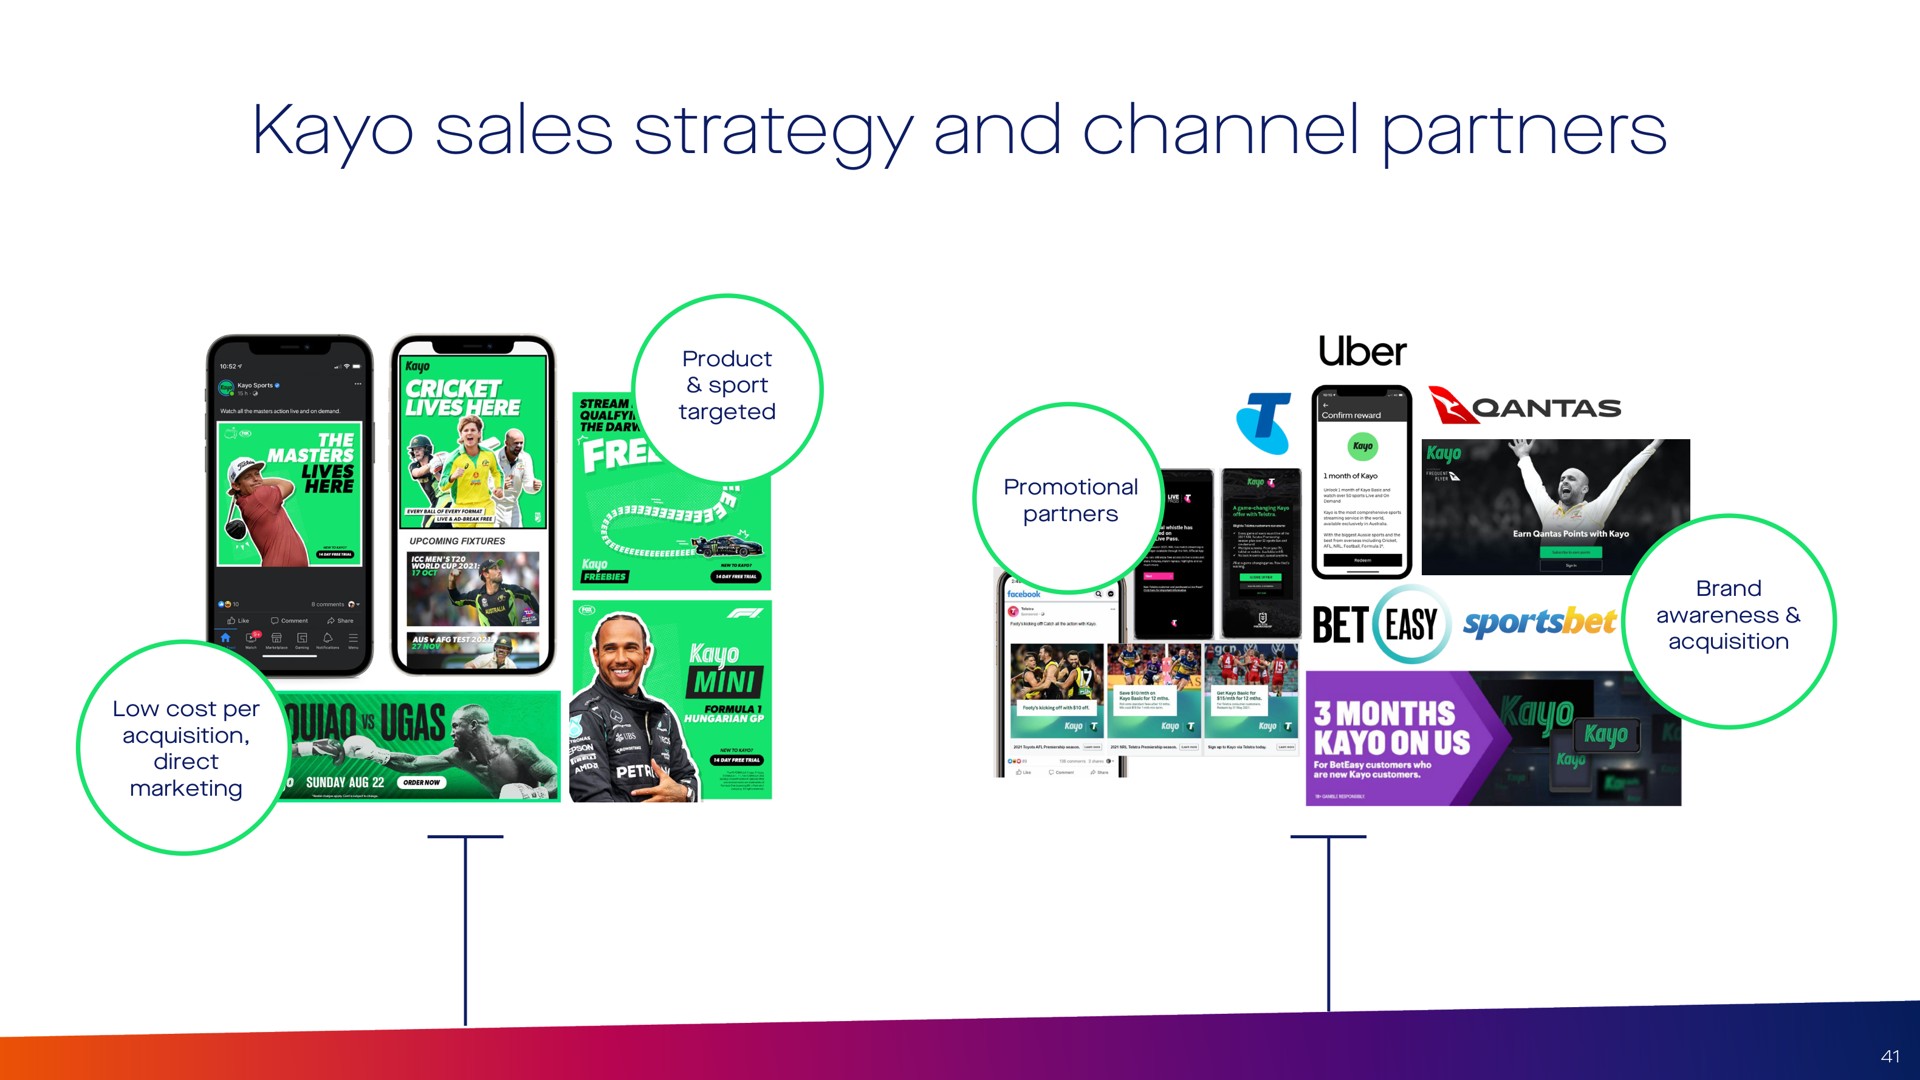 kayo sales strategy and channel partners | Foxtel